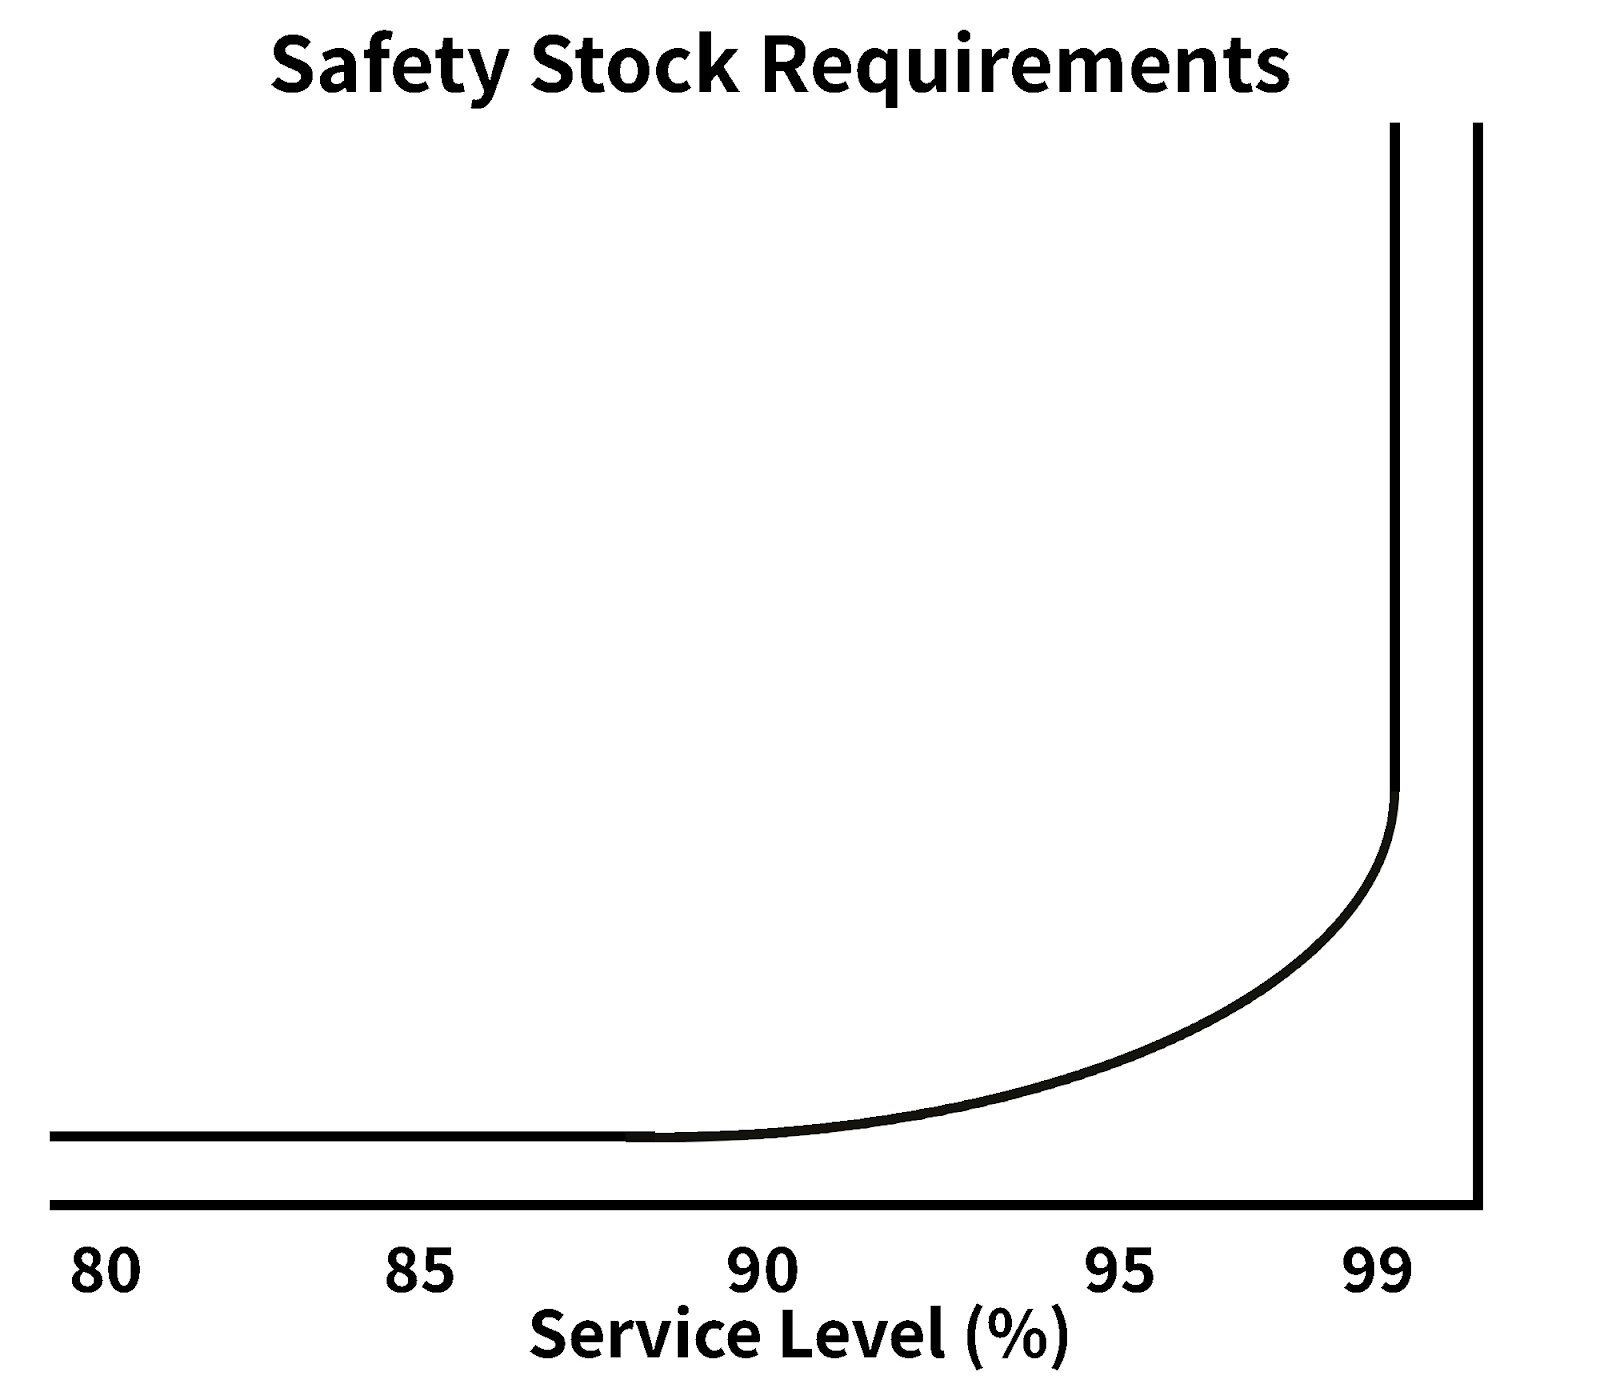 Graph showing safety stock requirements vs. service level 